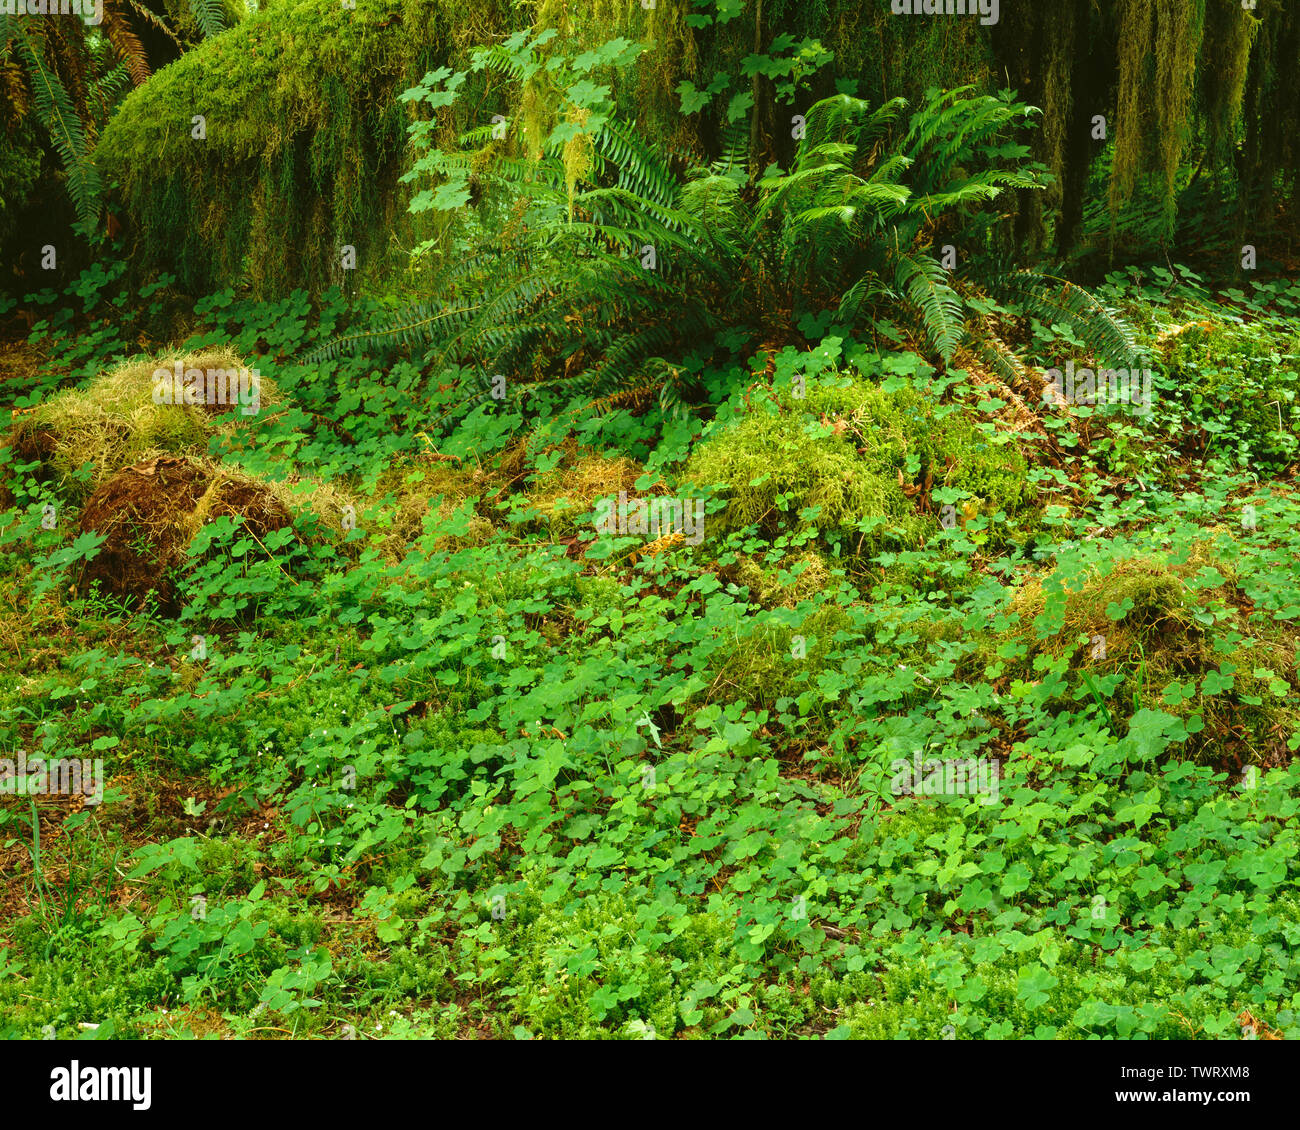 USA, Washington, Olympic National Park, Wood sorrel and swordfern thrive next to trunks of moss covered maples in Hoh Rain Forest. Stock Photo